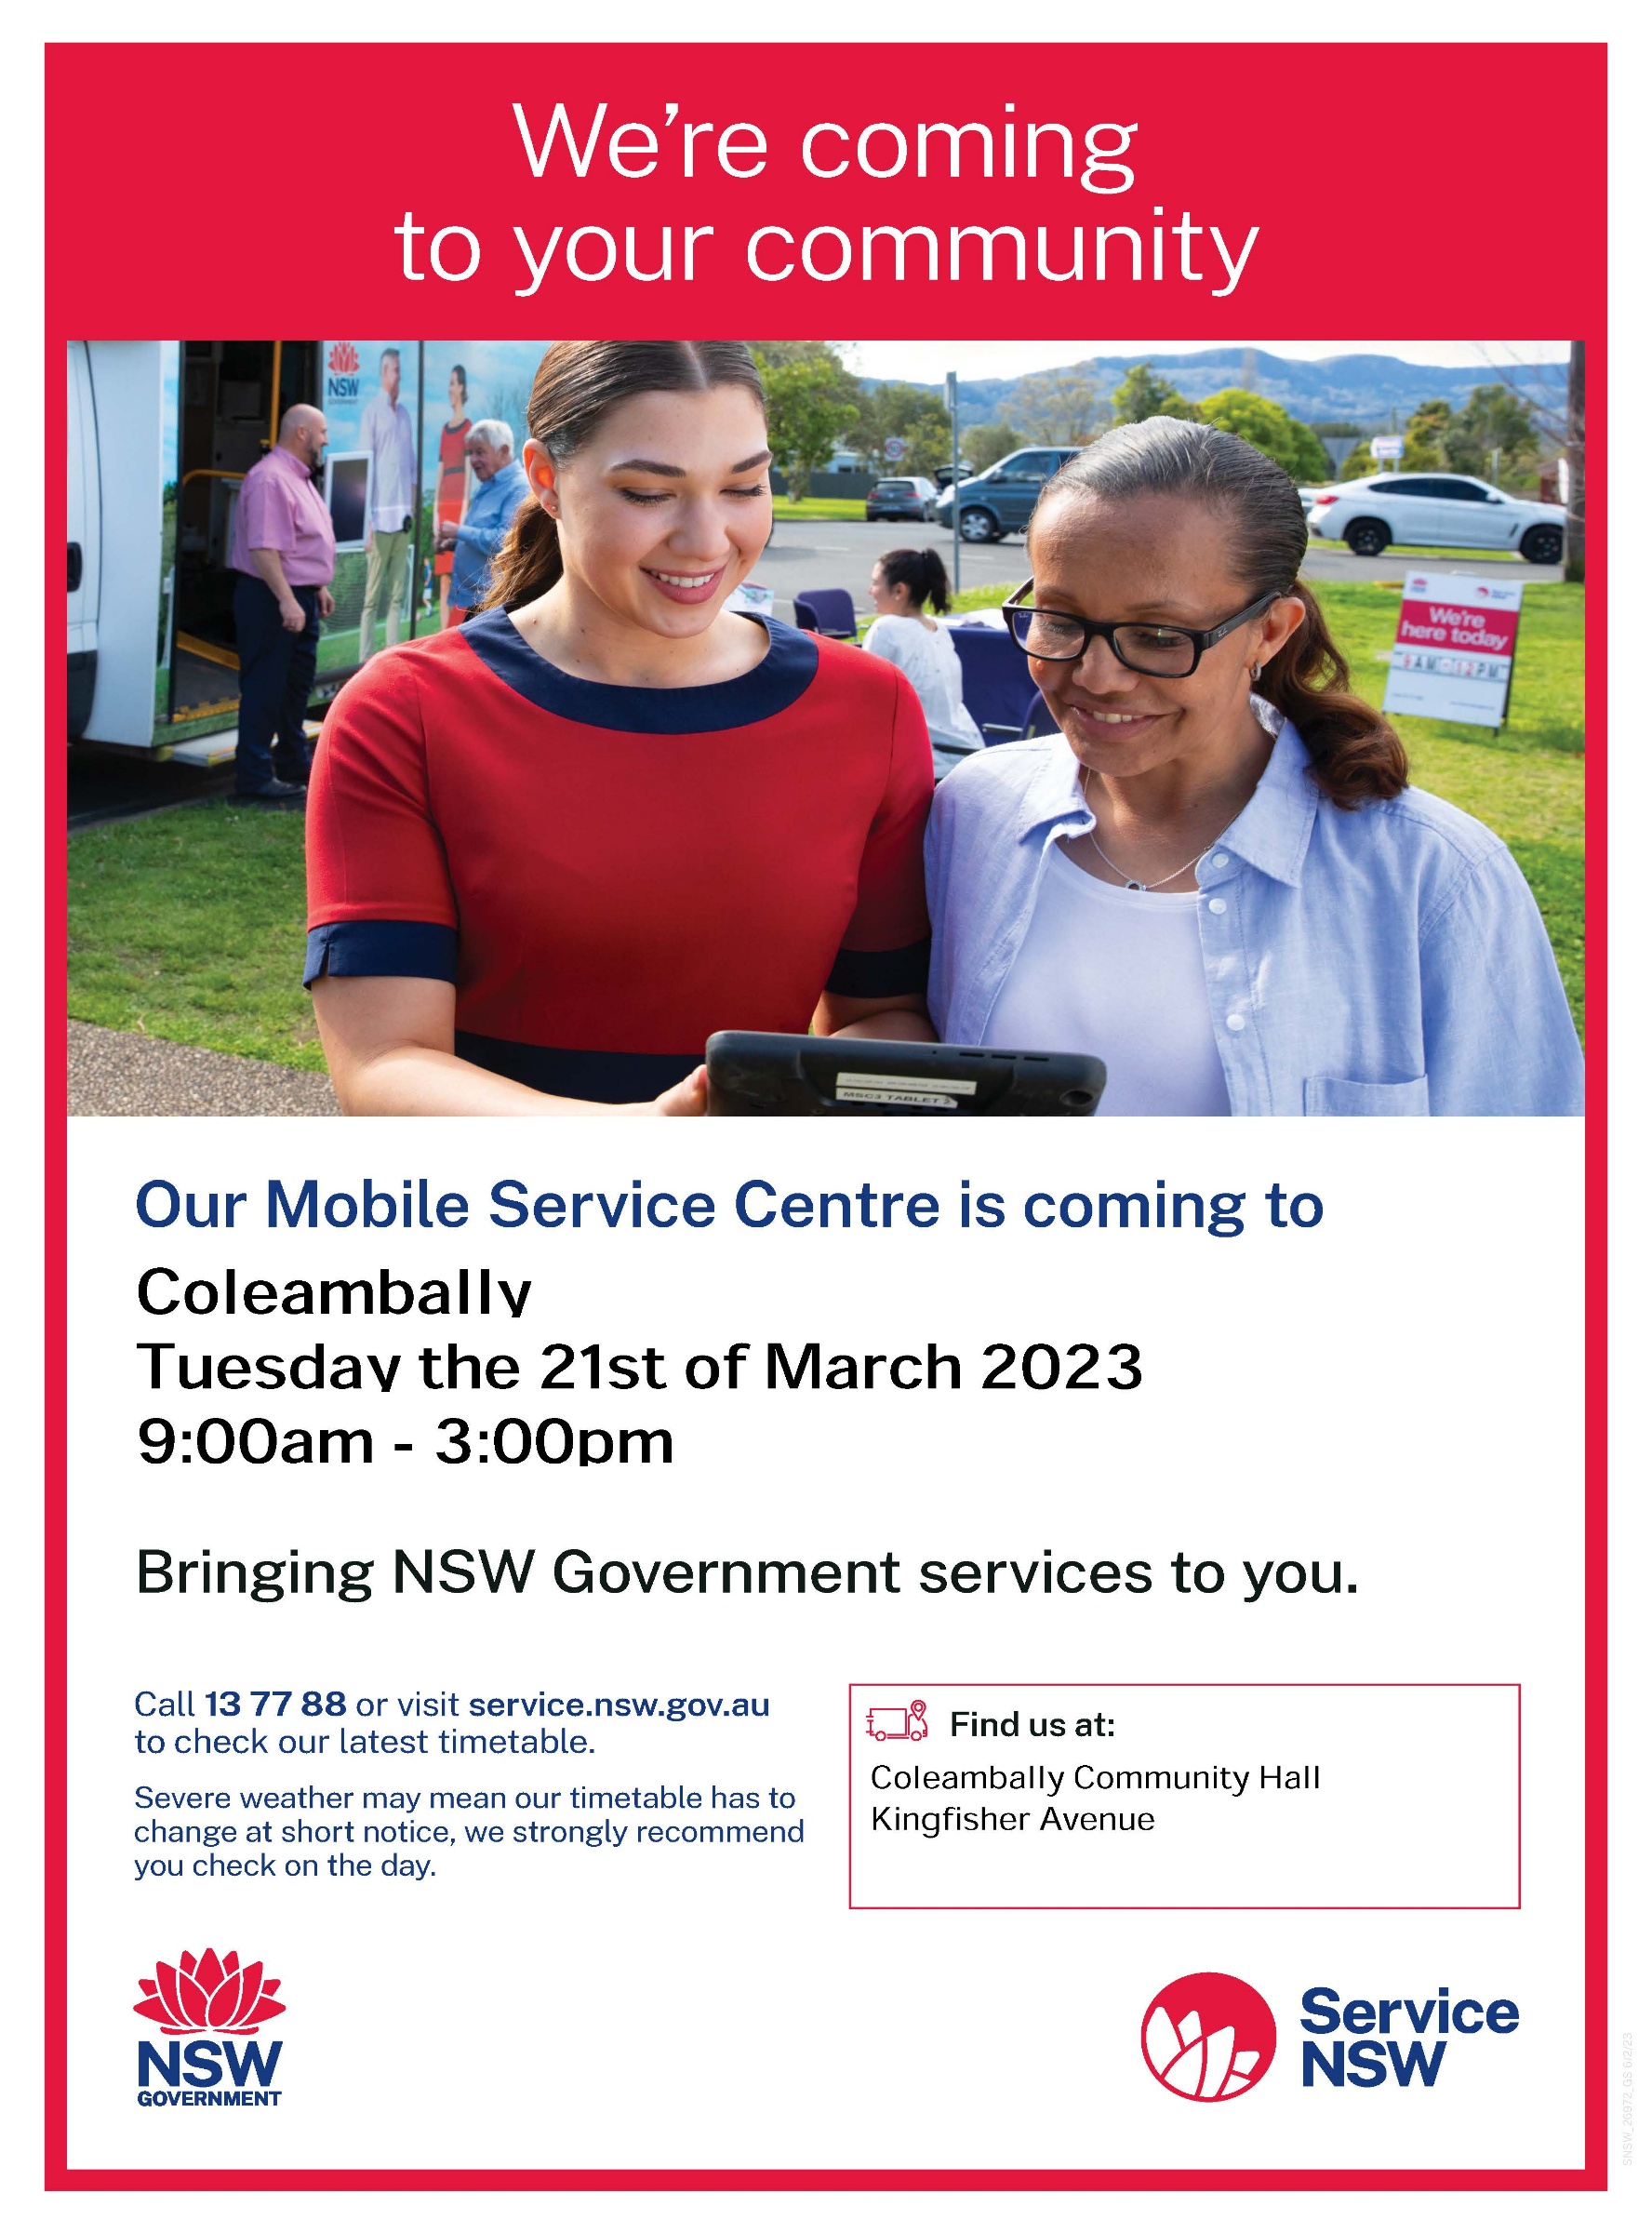 Service NSW Visiting Coleambally